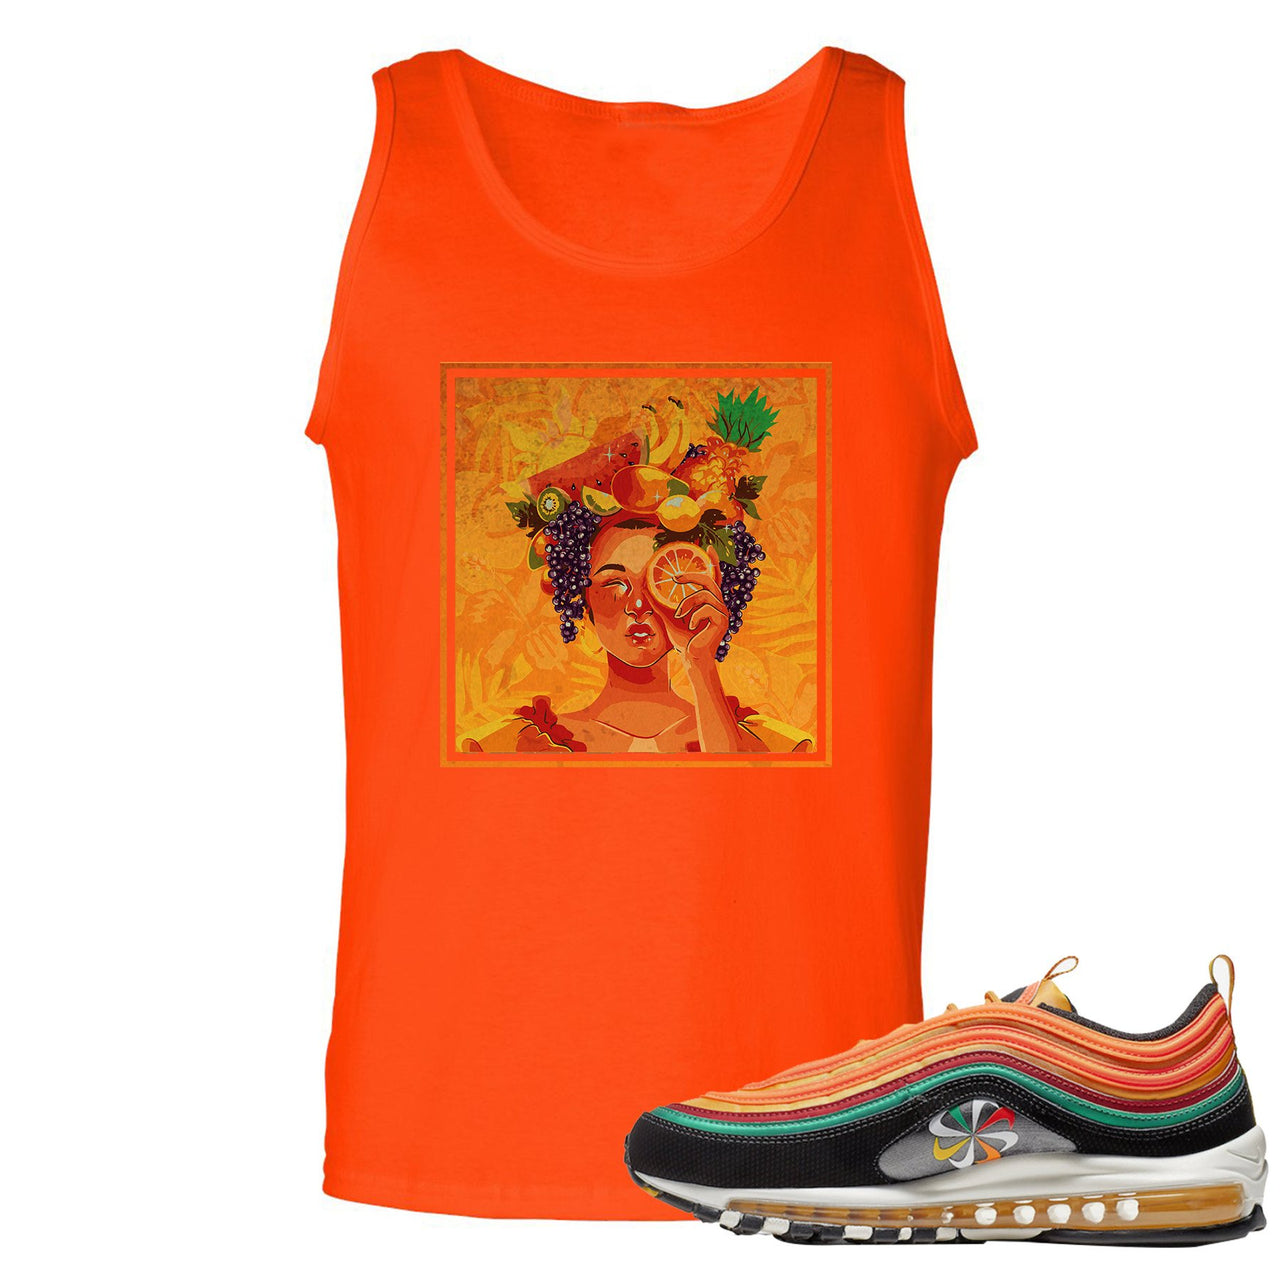 Printed on the front of the Air Max 97 Sunburst orange sneaker matching tank top is the Lady Fruit logo